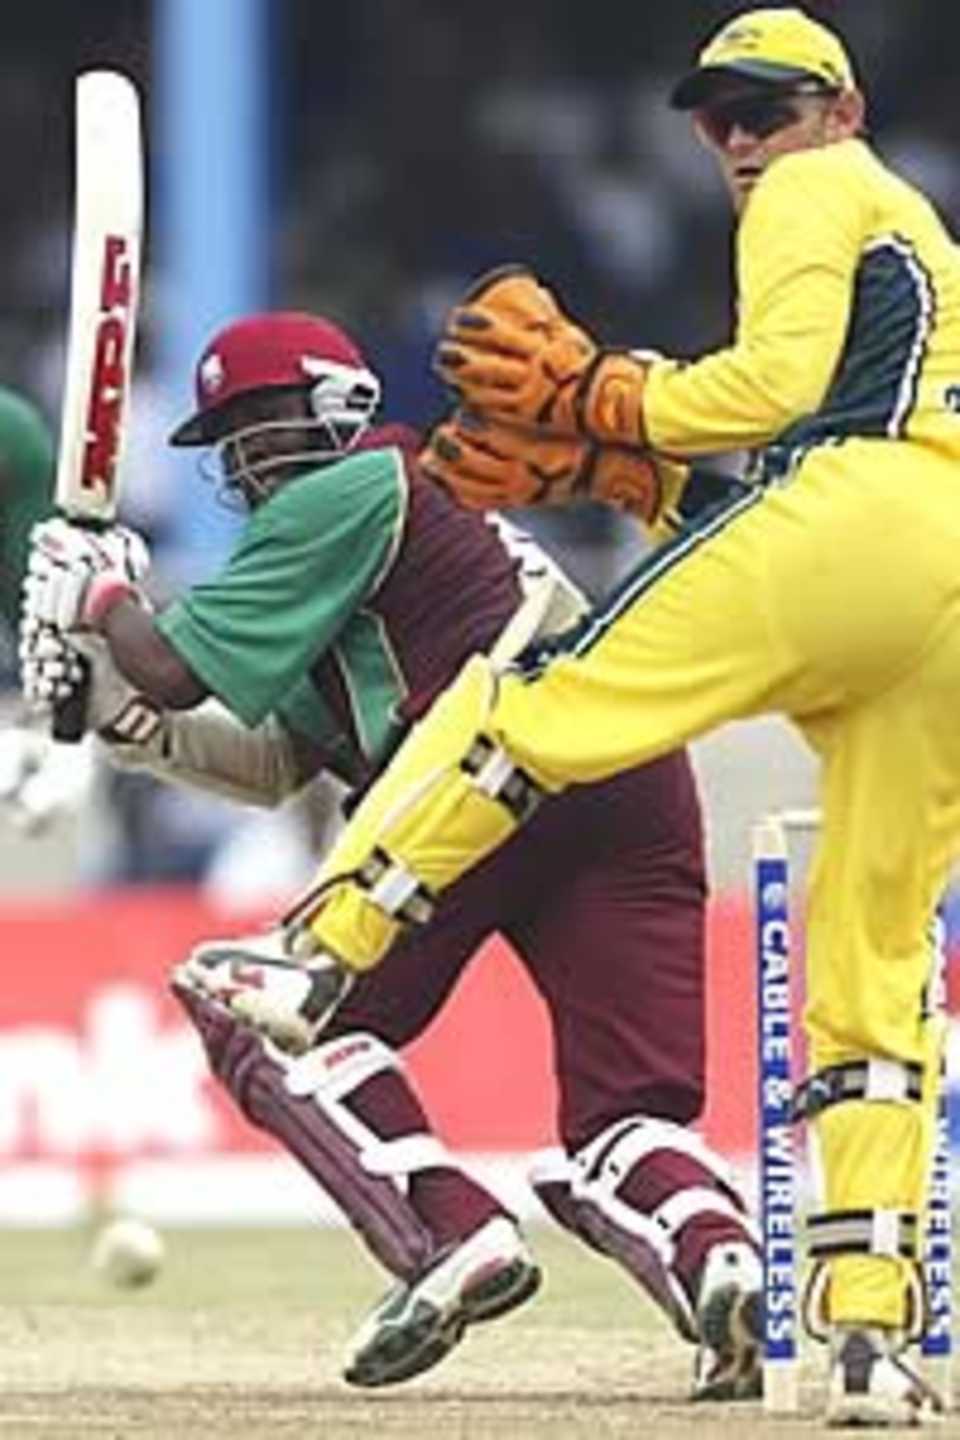 PORT OF SPAIN, TRINIDAD - MAY 25: Brian Lara of the West Indies in action during the 5th One Day International between the West Indies and Australia played May 25, 2003 at Queens Park Oval Port of Spain, Trinidad.